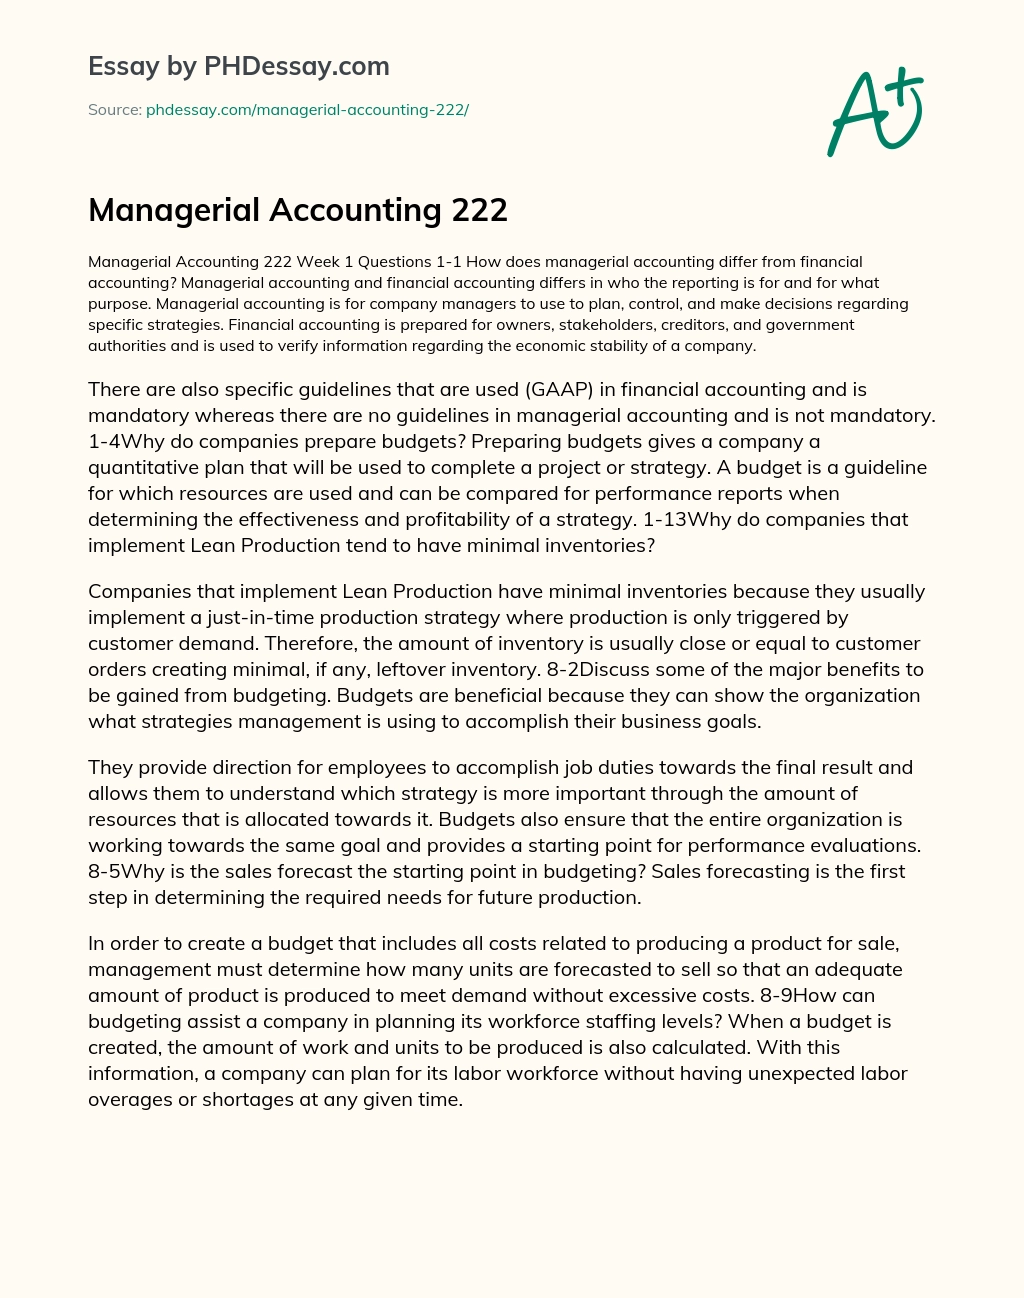 Managerial Accounting 222 essay